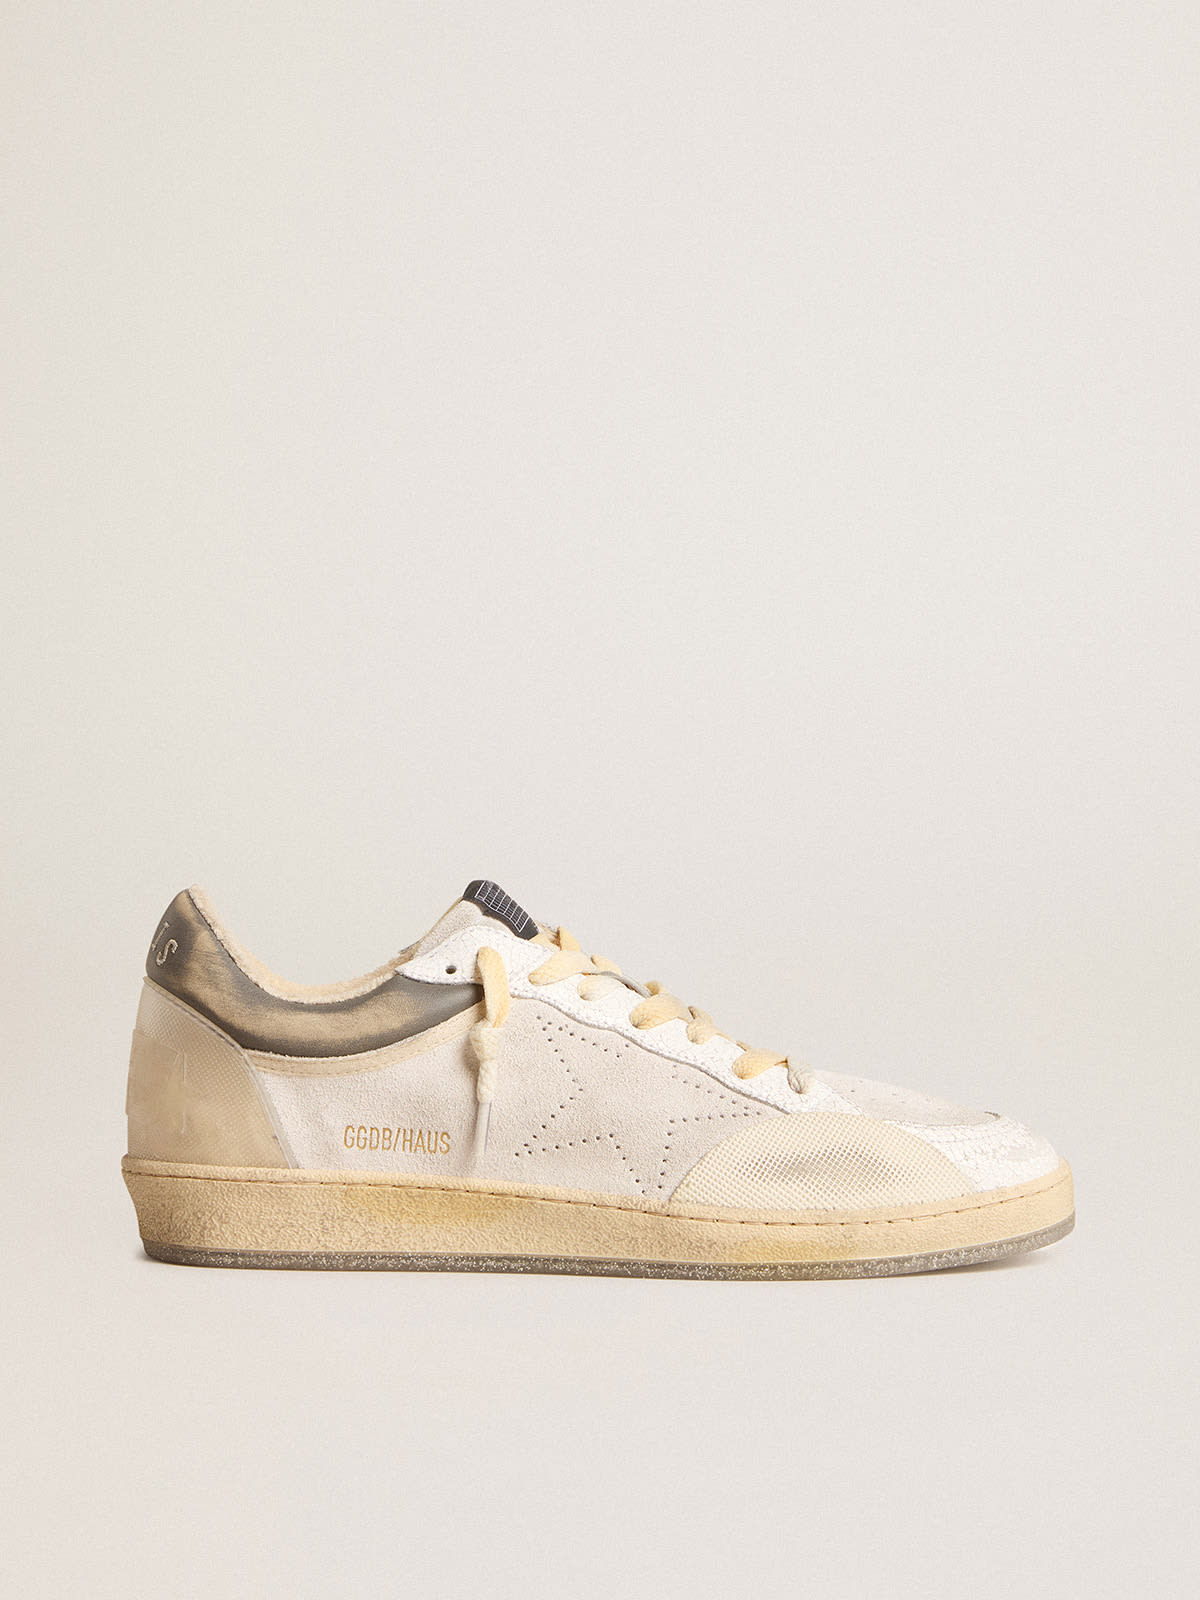 Golden Goose - Men’s Ball Star Pro in optical white leather with rubber inserts in 